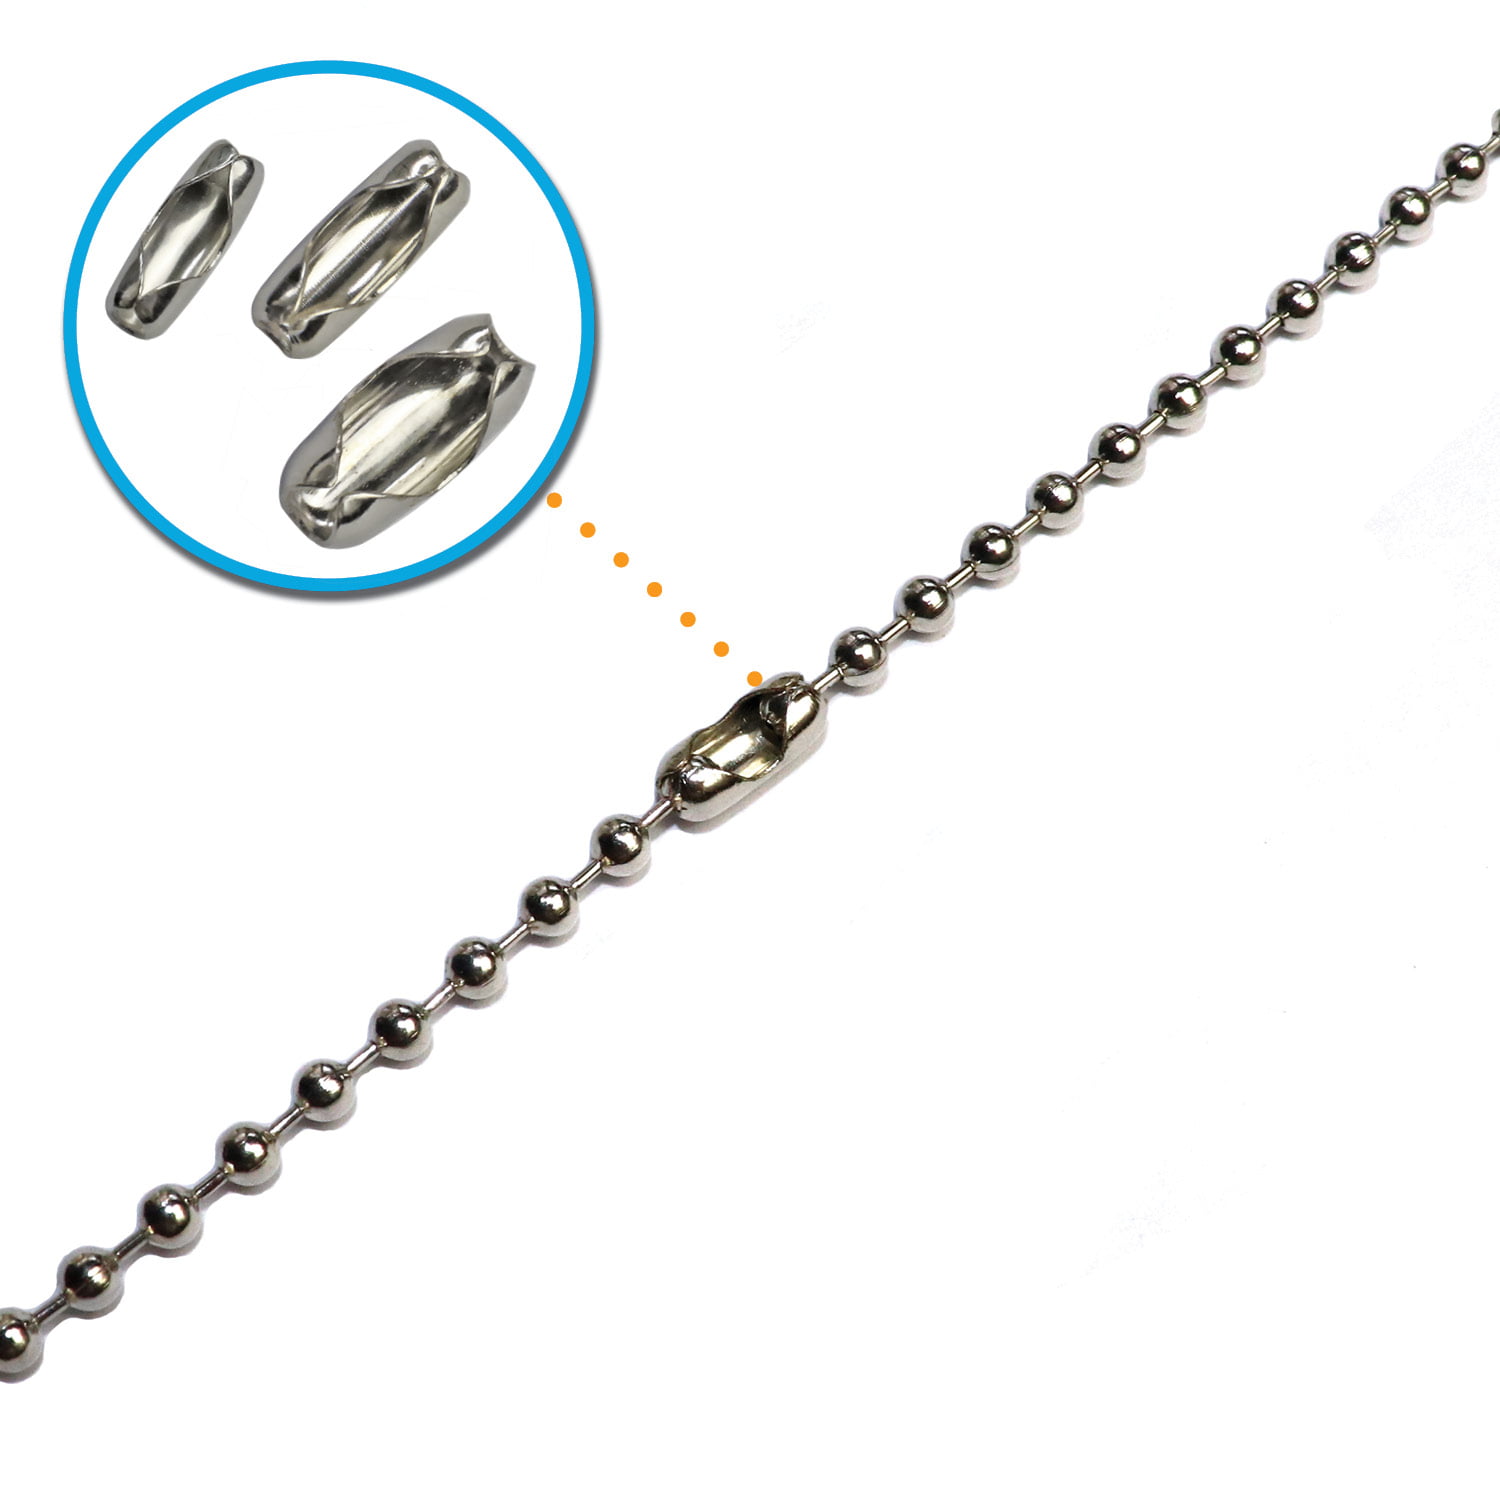 Stainless Steel Ball Chain, Necklace Chain Ball Bead, 55ft Bead Chain Ball  Chain Bulk Bead Chain with 100 Pcs Matching Connectors Clasps for Necklace